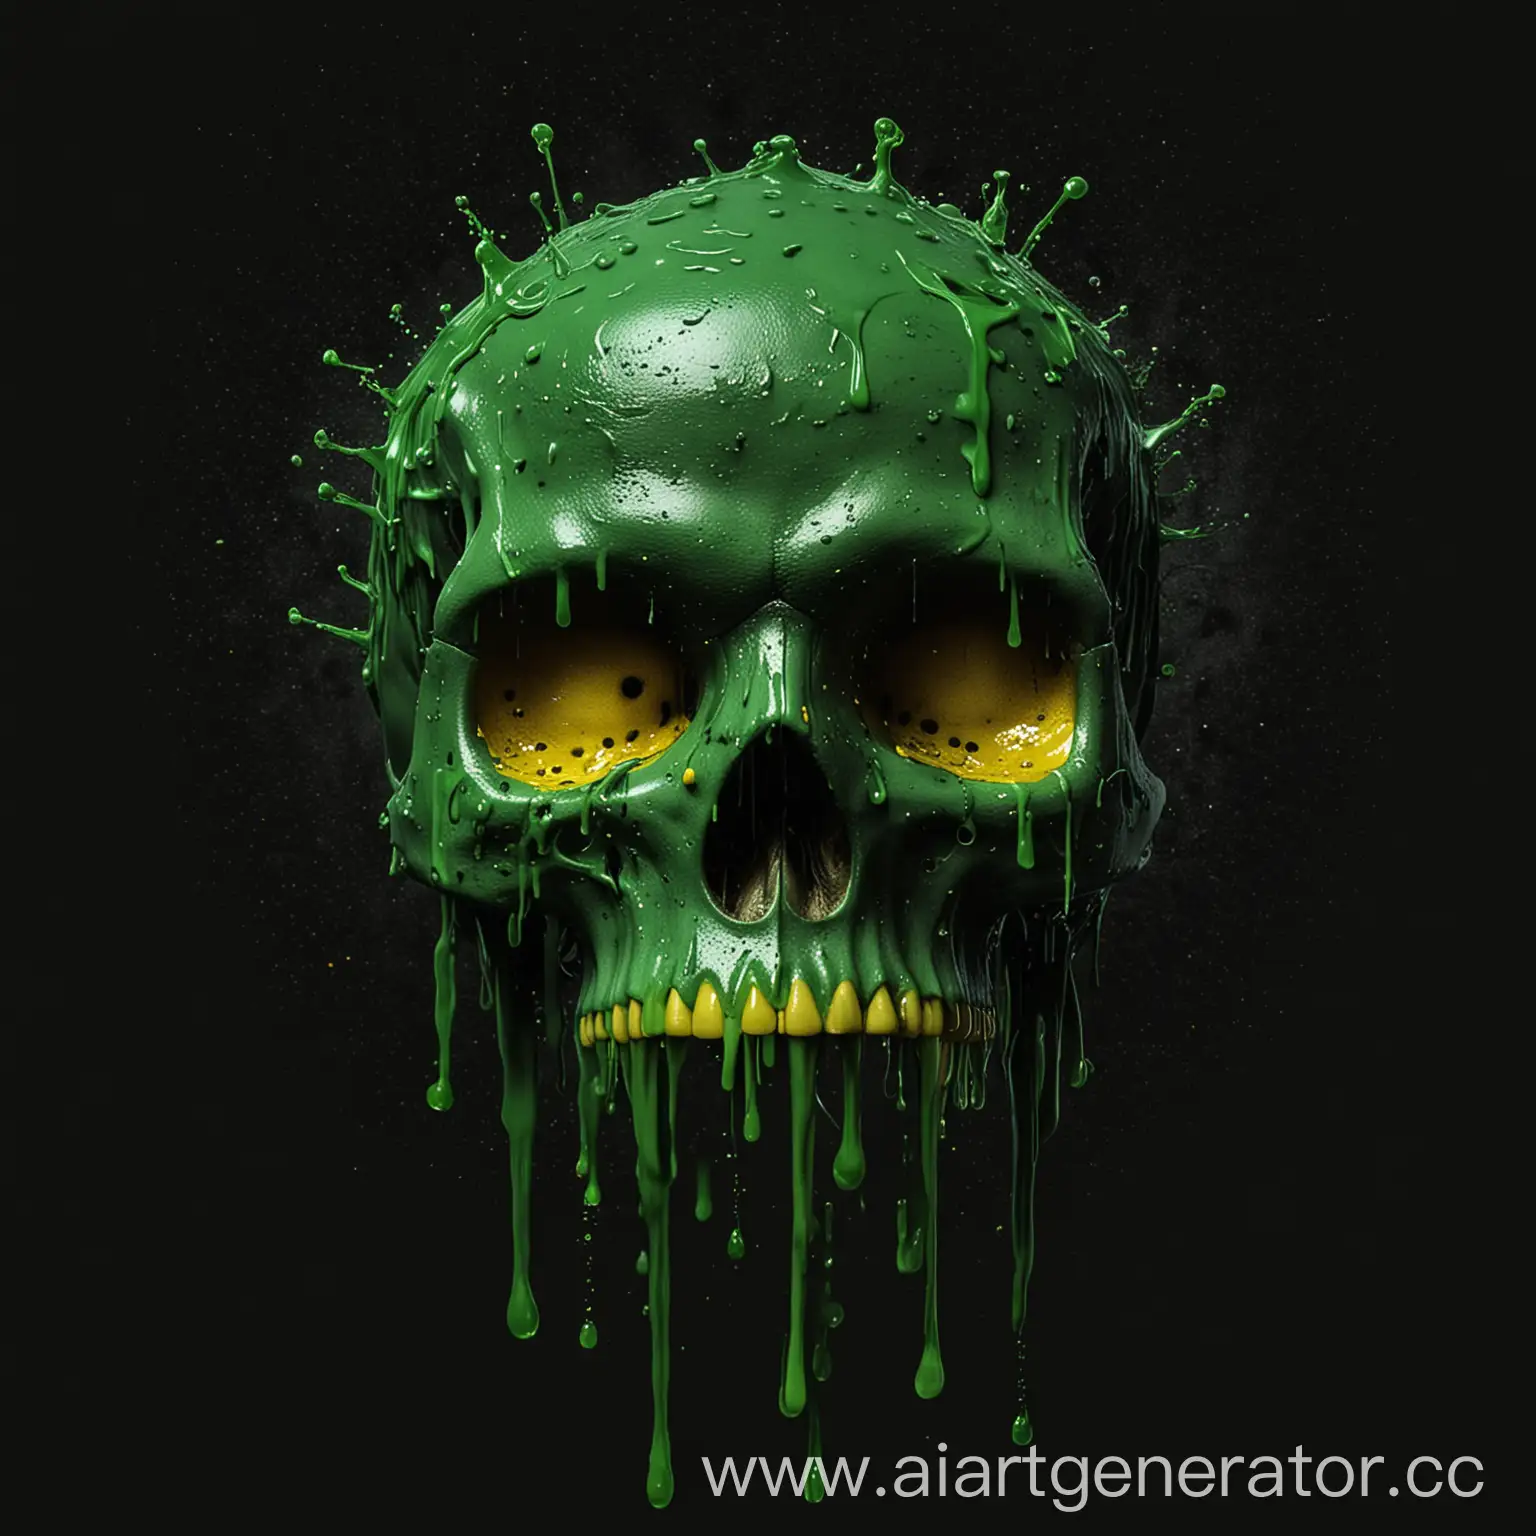 A green skull with yellow eyes and a black background. The skull is dripping a green liquid.